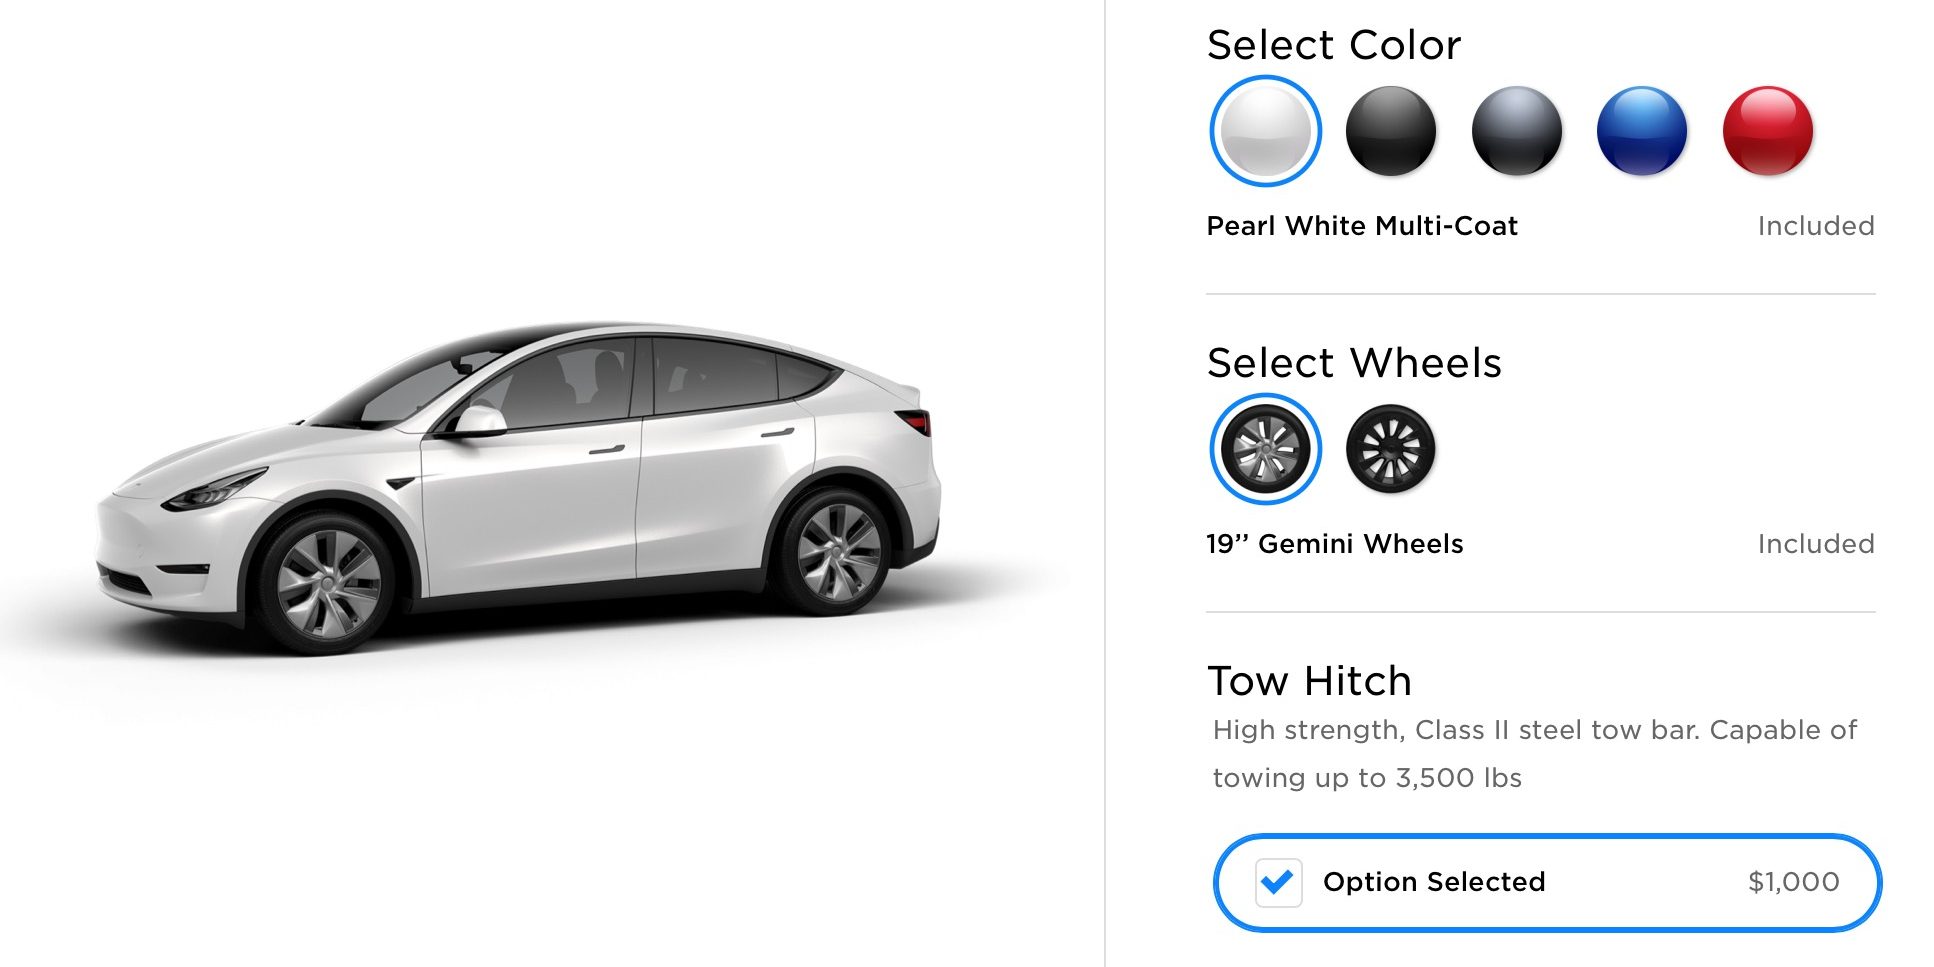 Tesla Model Y gets $1,000 tow hitch option, $450 roof rack accessory